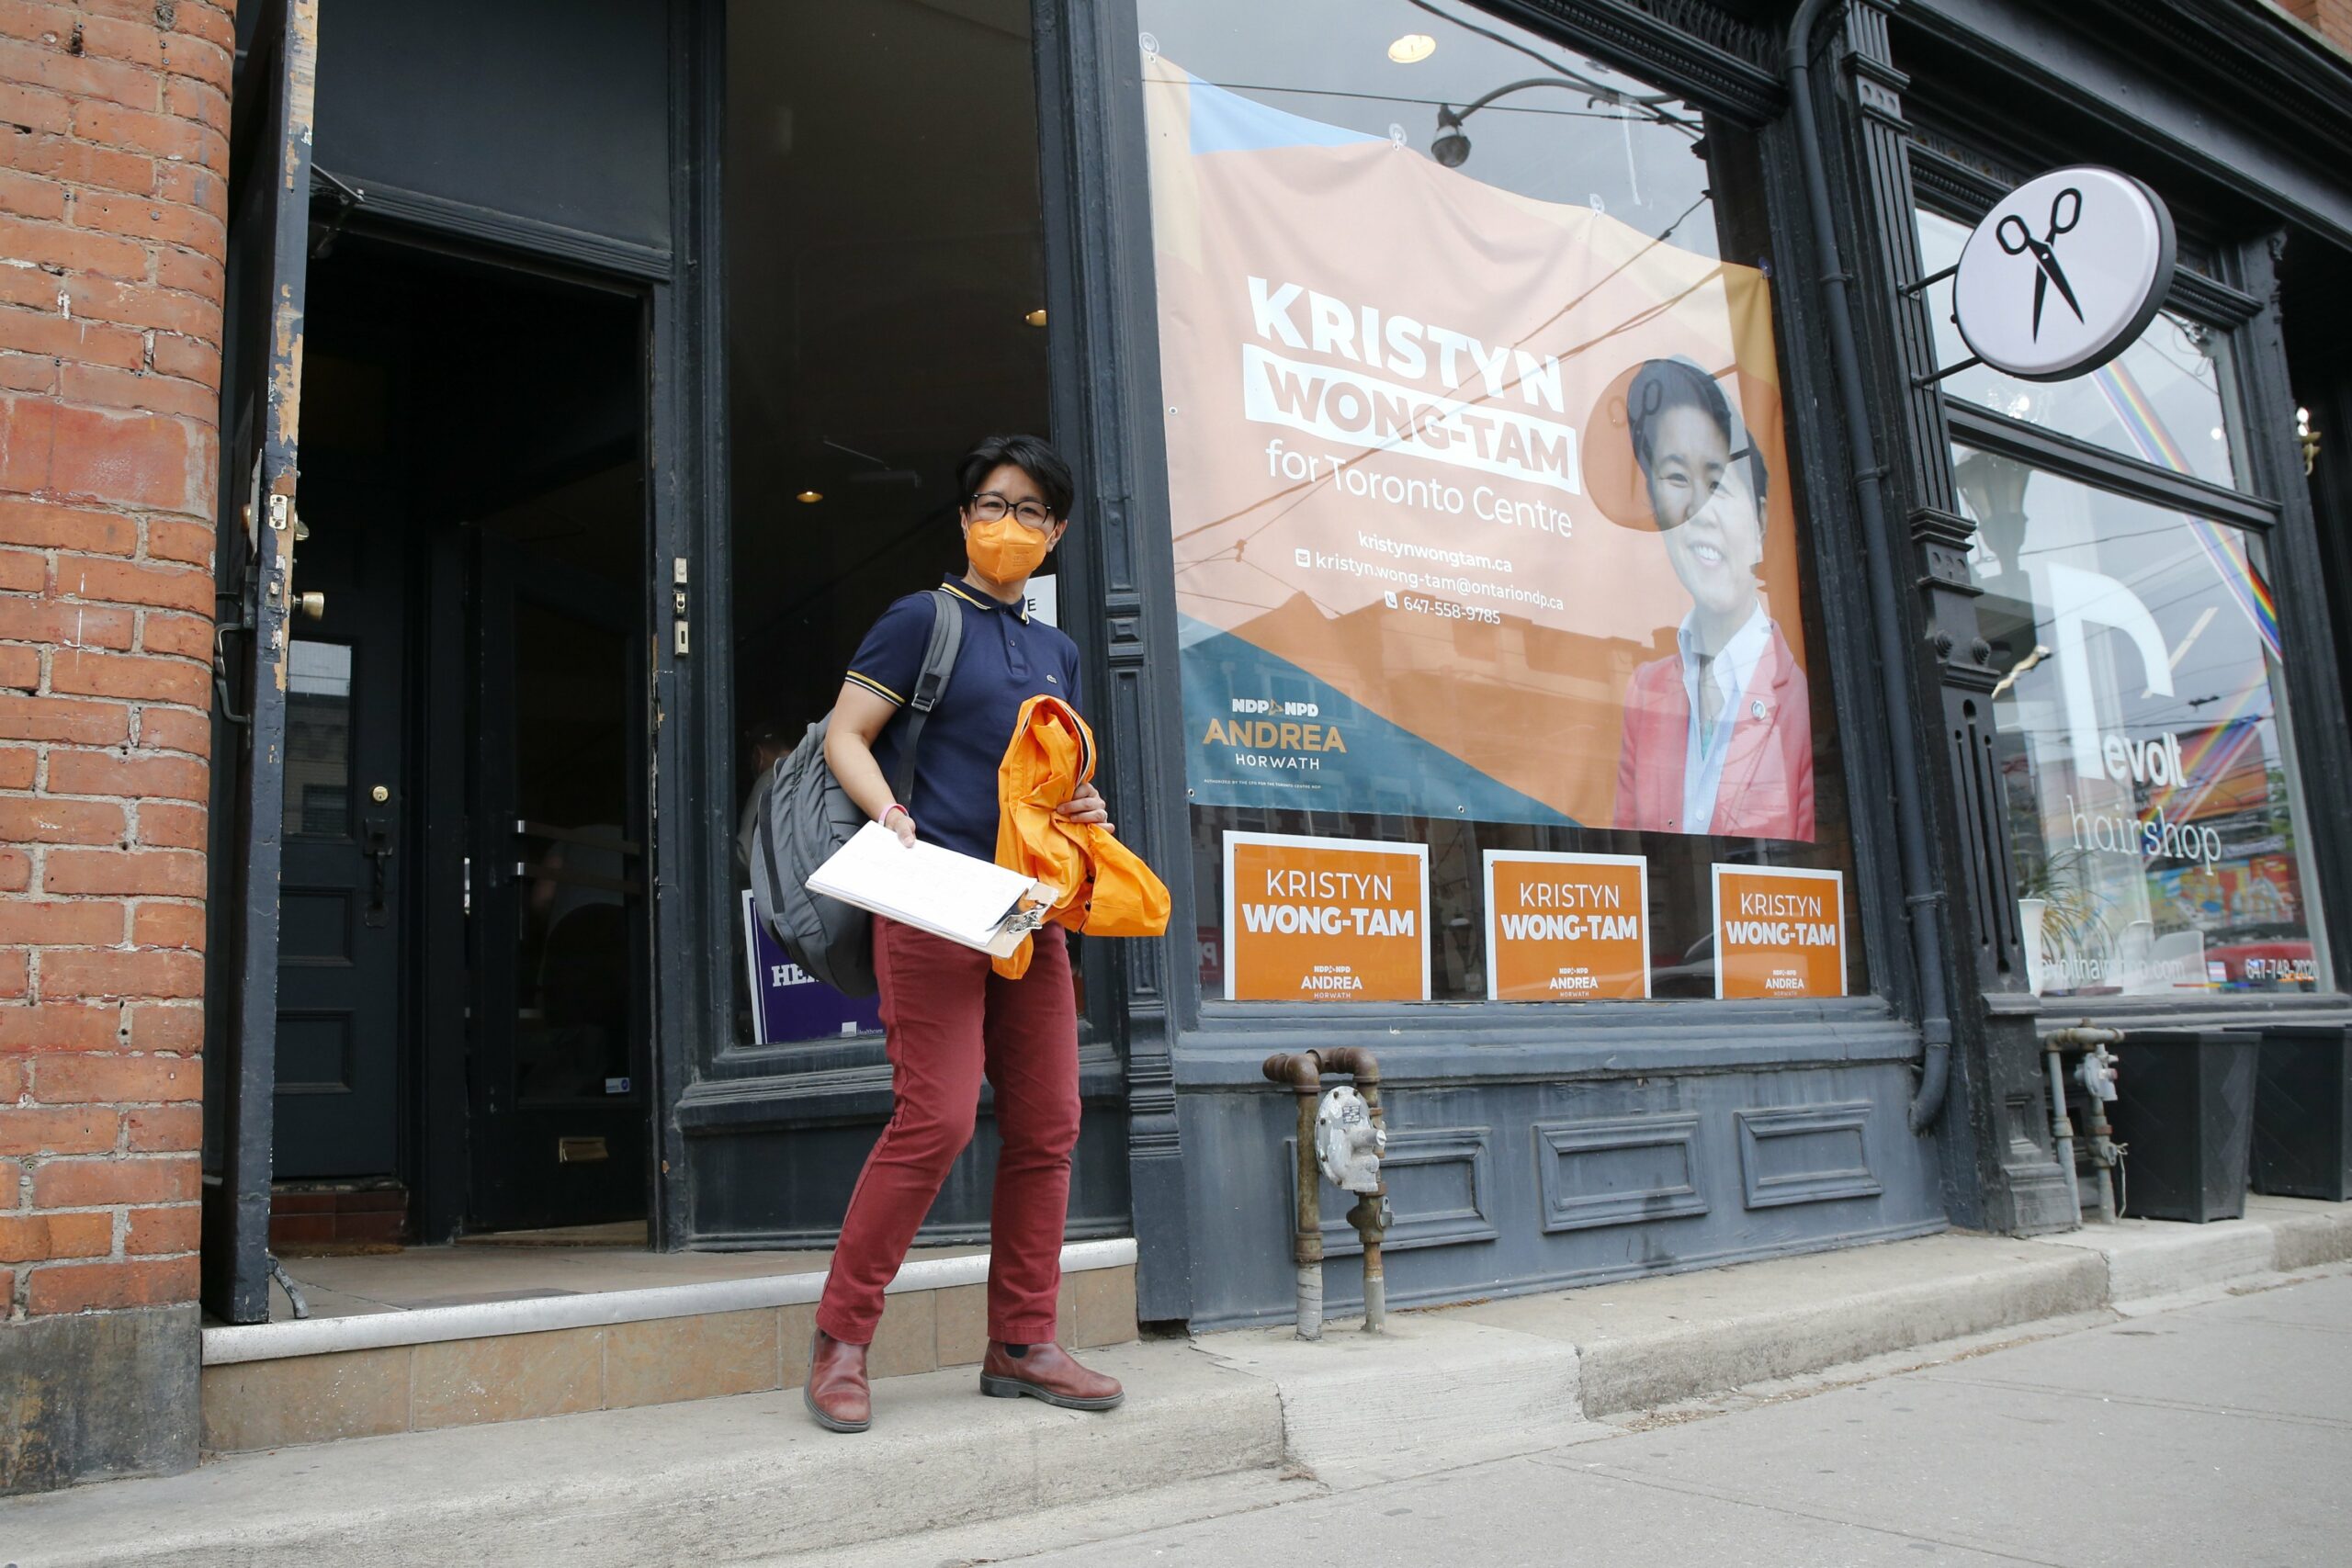 Kristyn Wong-Tam not considering a bid for NDP leadership (right now)